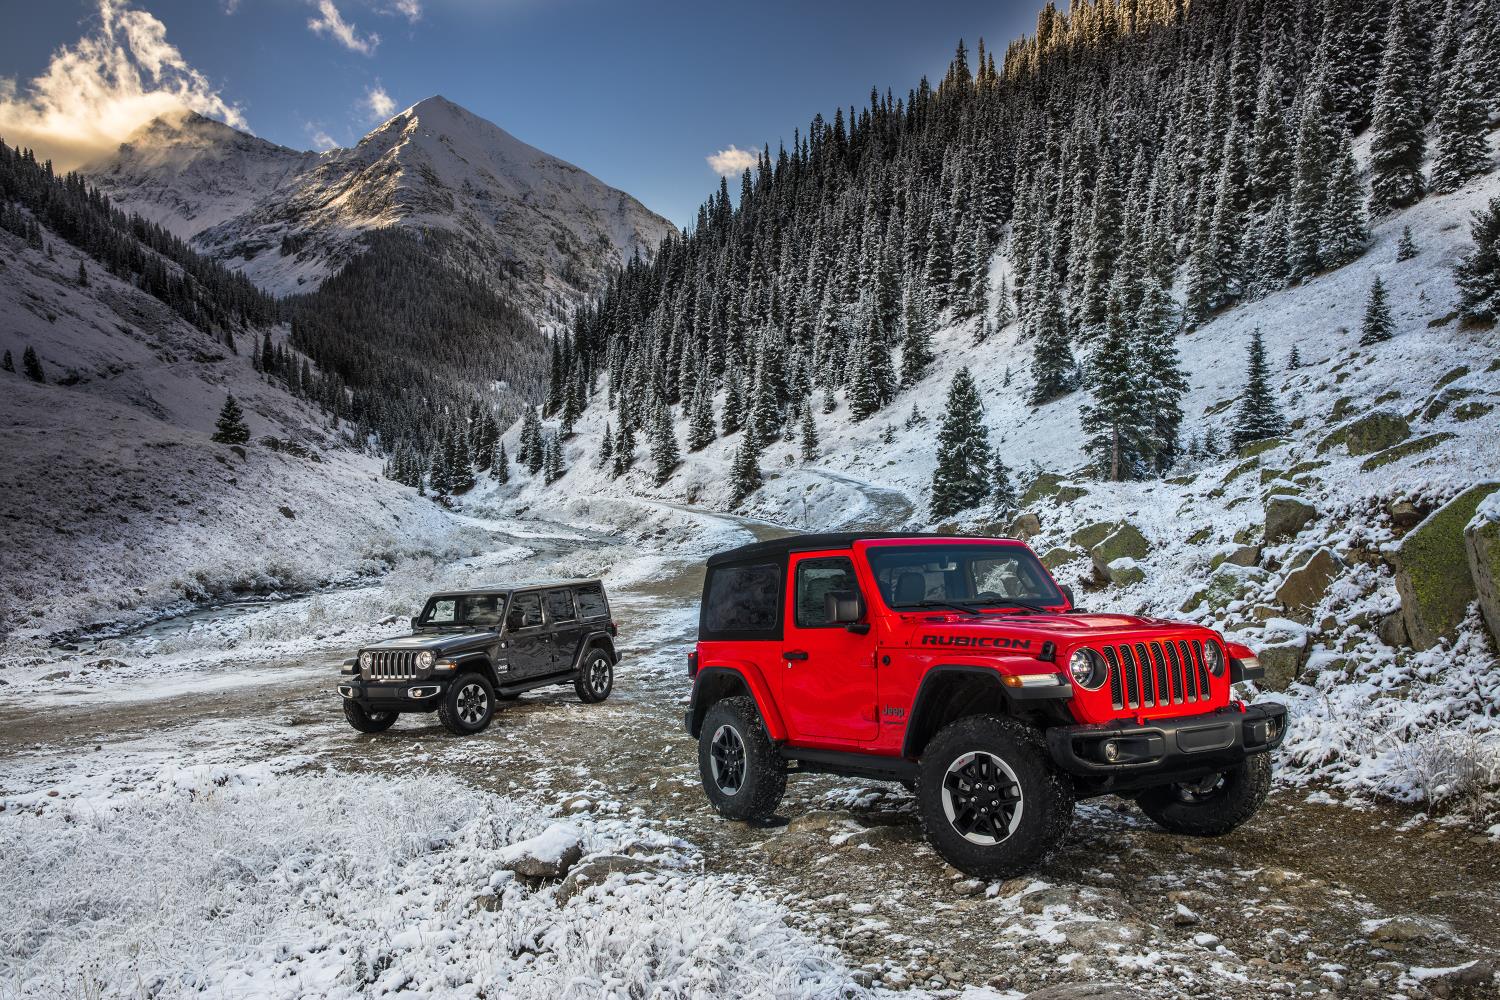 Fun Winter Activities with your Jeep